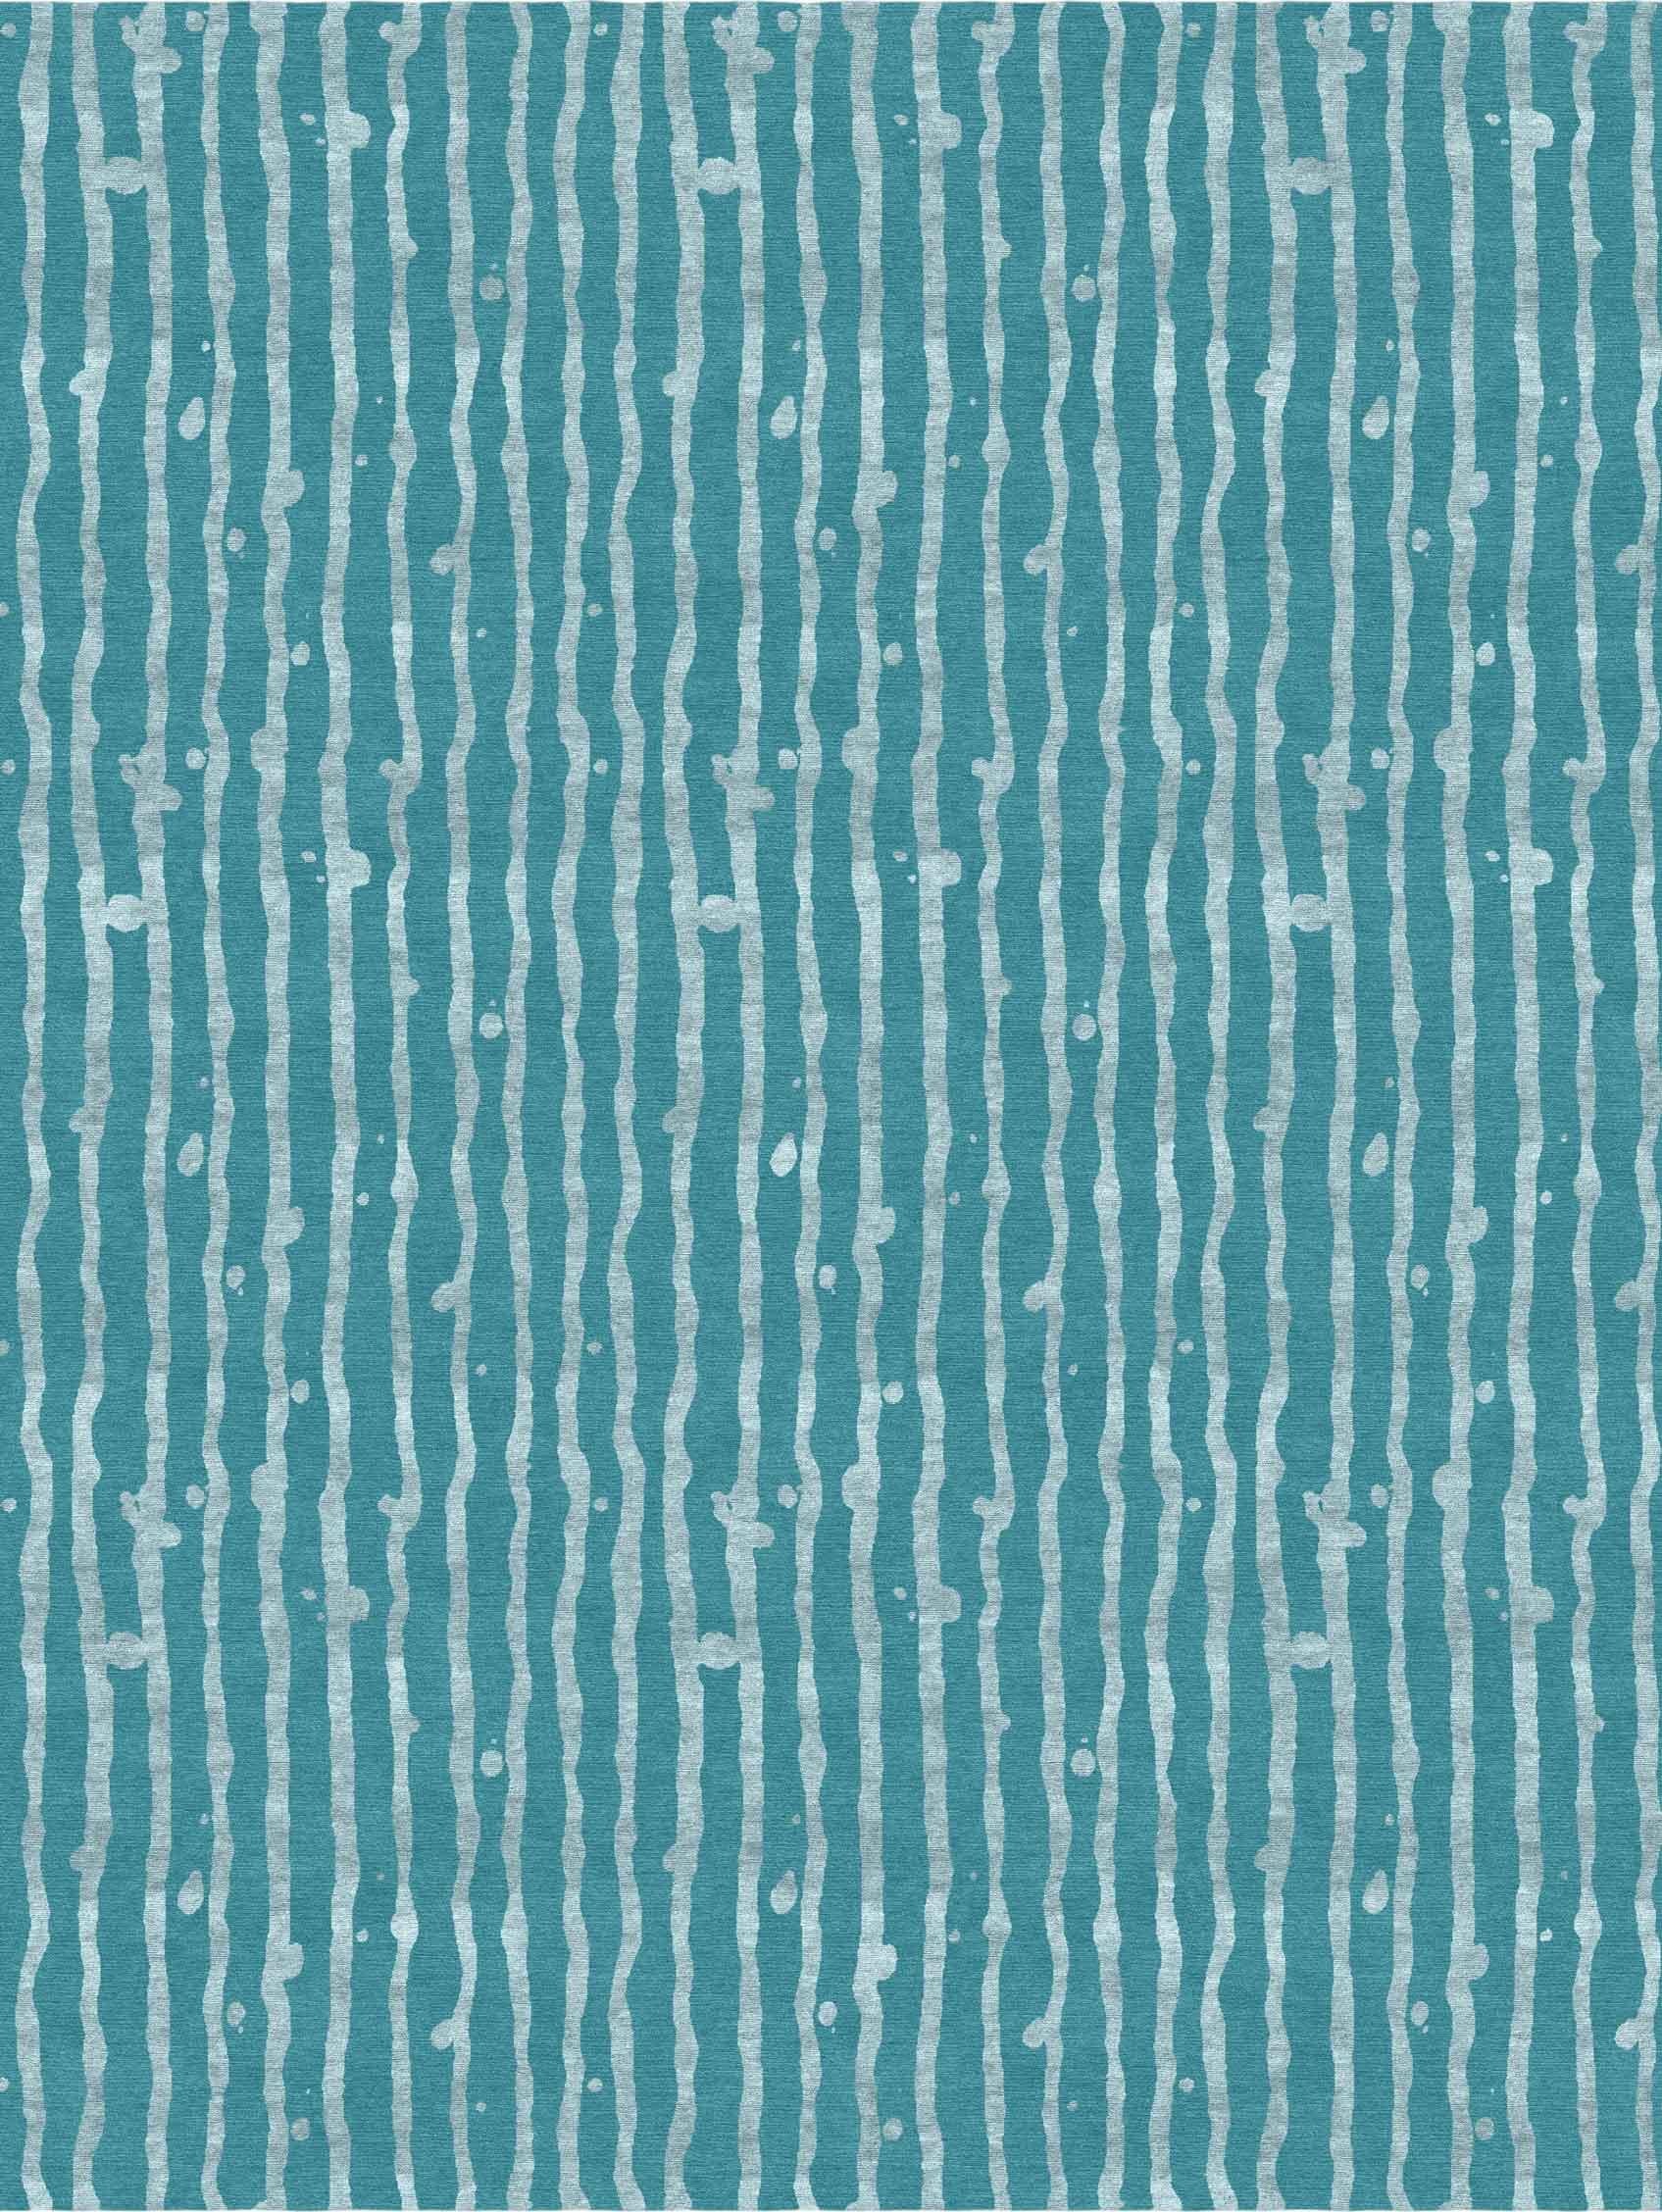 Drippy Stripe Gulf hand knotted Rug by Eskayel
Dimensions: D 8' x H 10'
Pile Height: 6 mm
Materials: 100% Merino Wool

Eskayel hand knotted rugs are woven to order and can be customized in various sizes, colors, materials, and weave